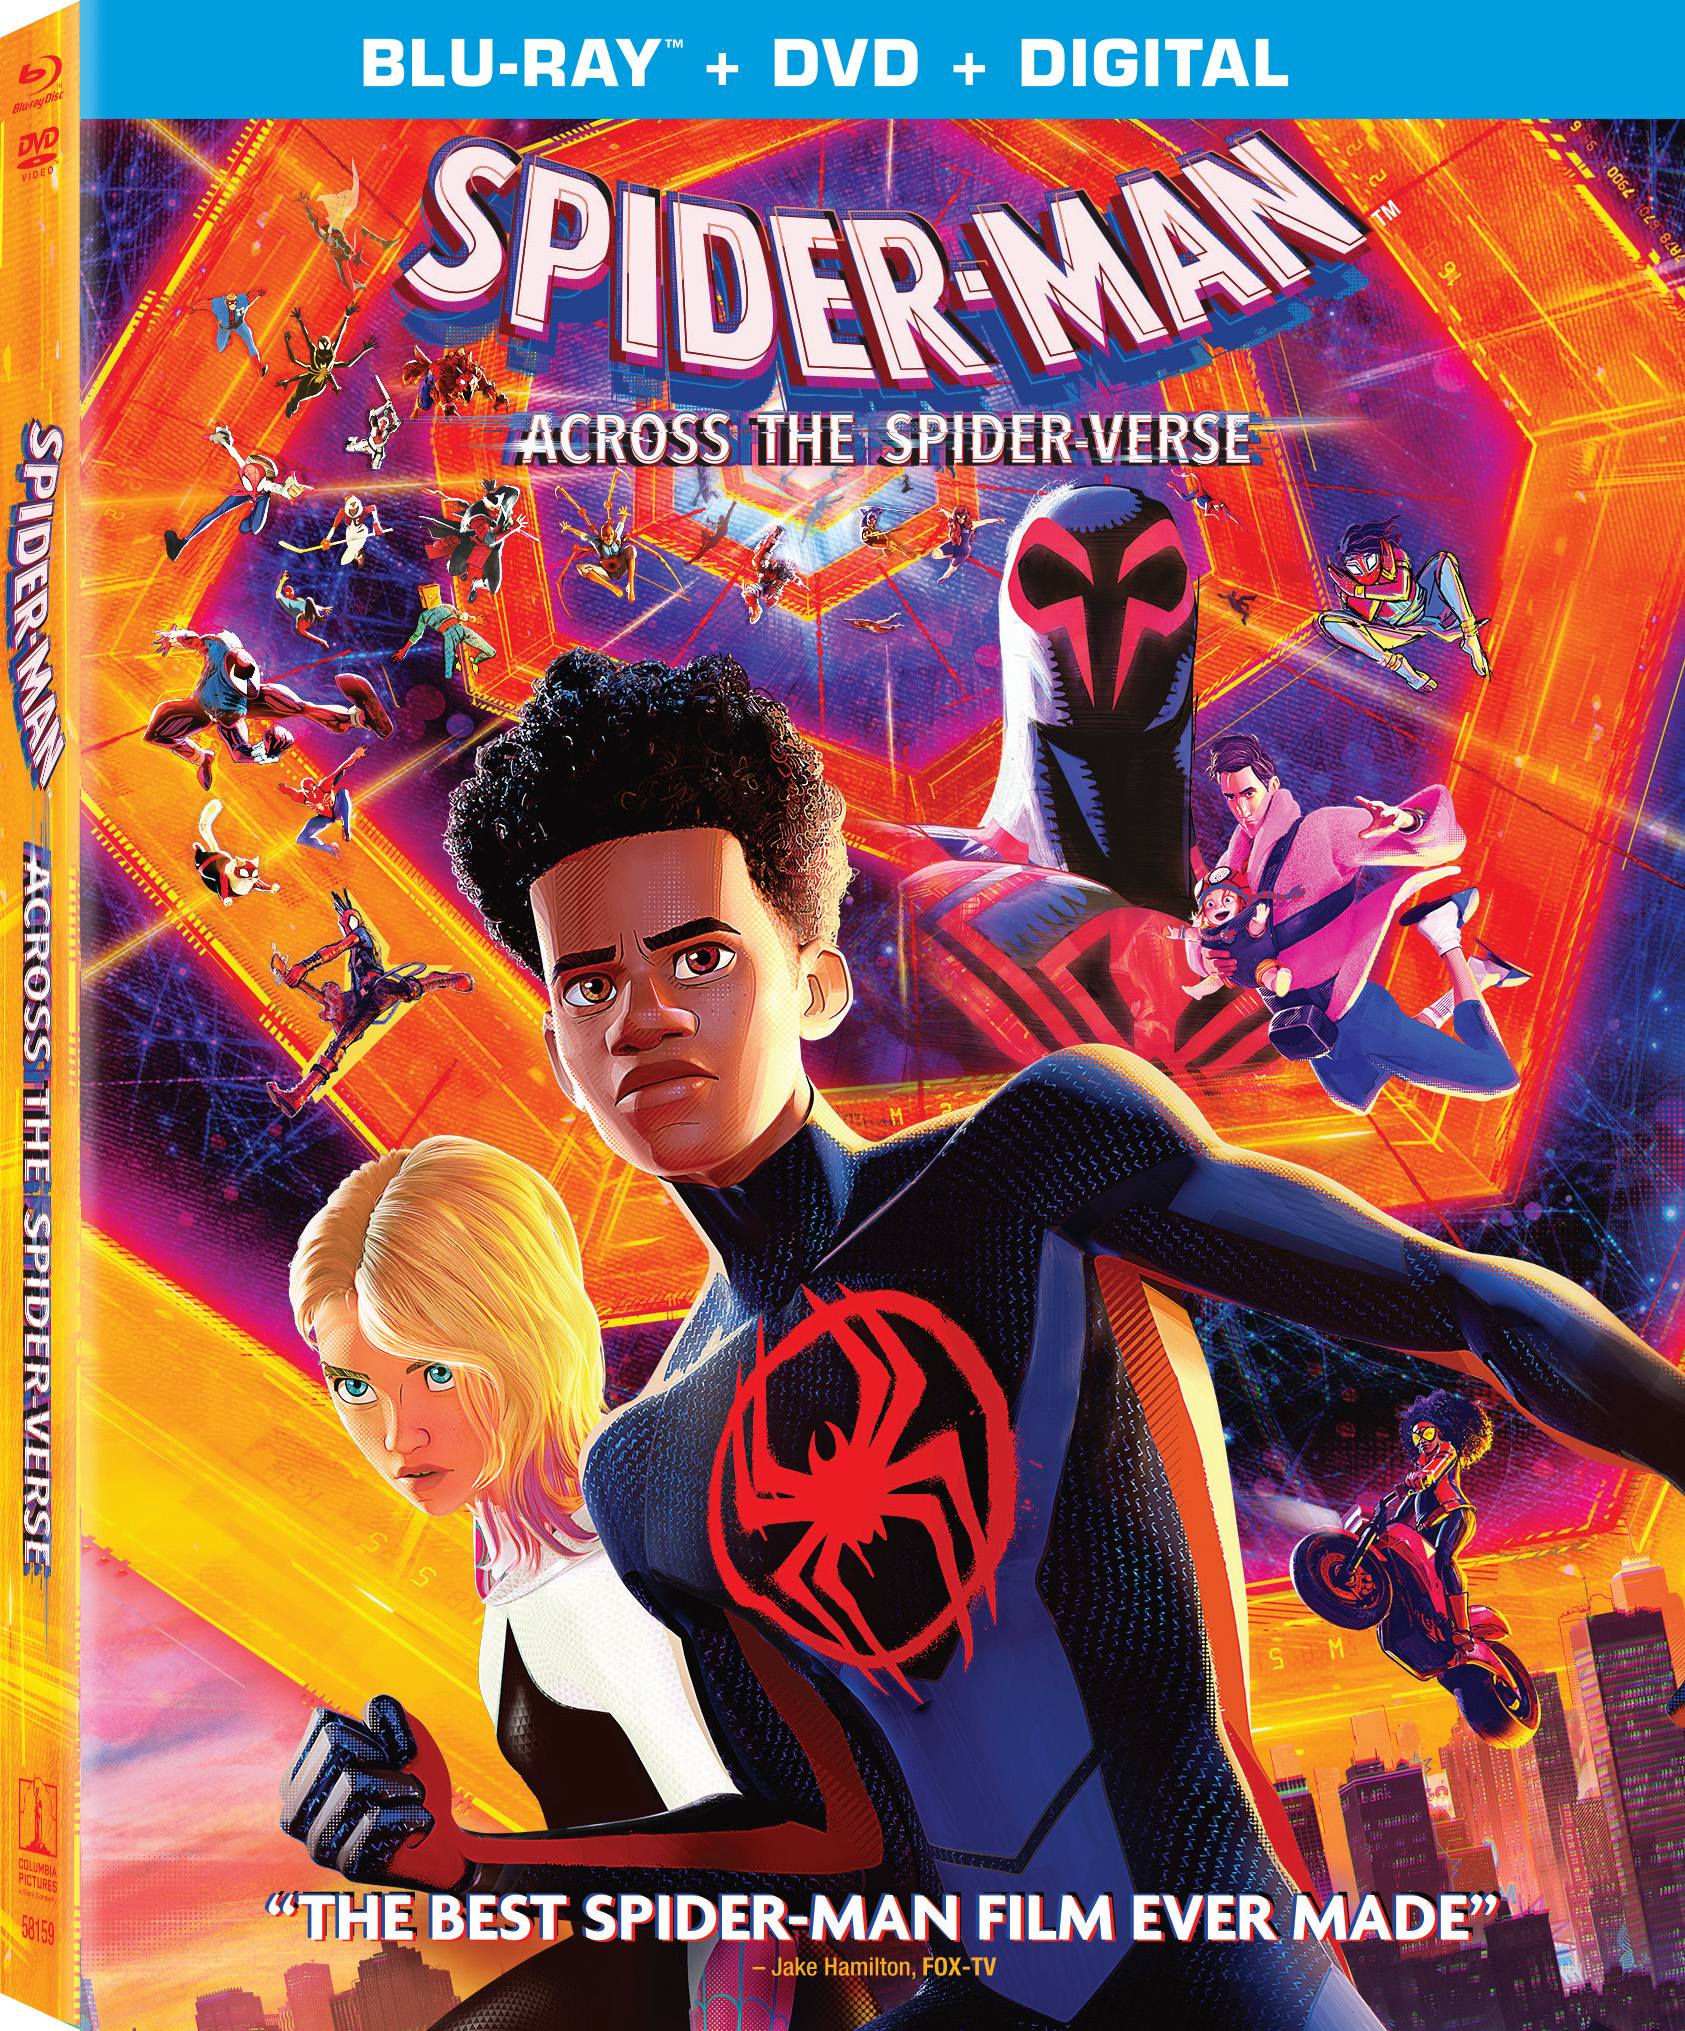 Swinging Into The Spider-Verse: A Review of Spider-Man: Across The Spider-Verse DVD